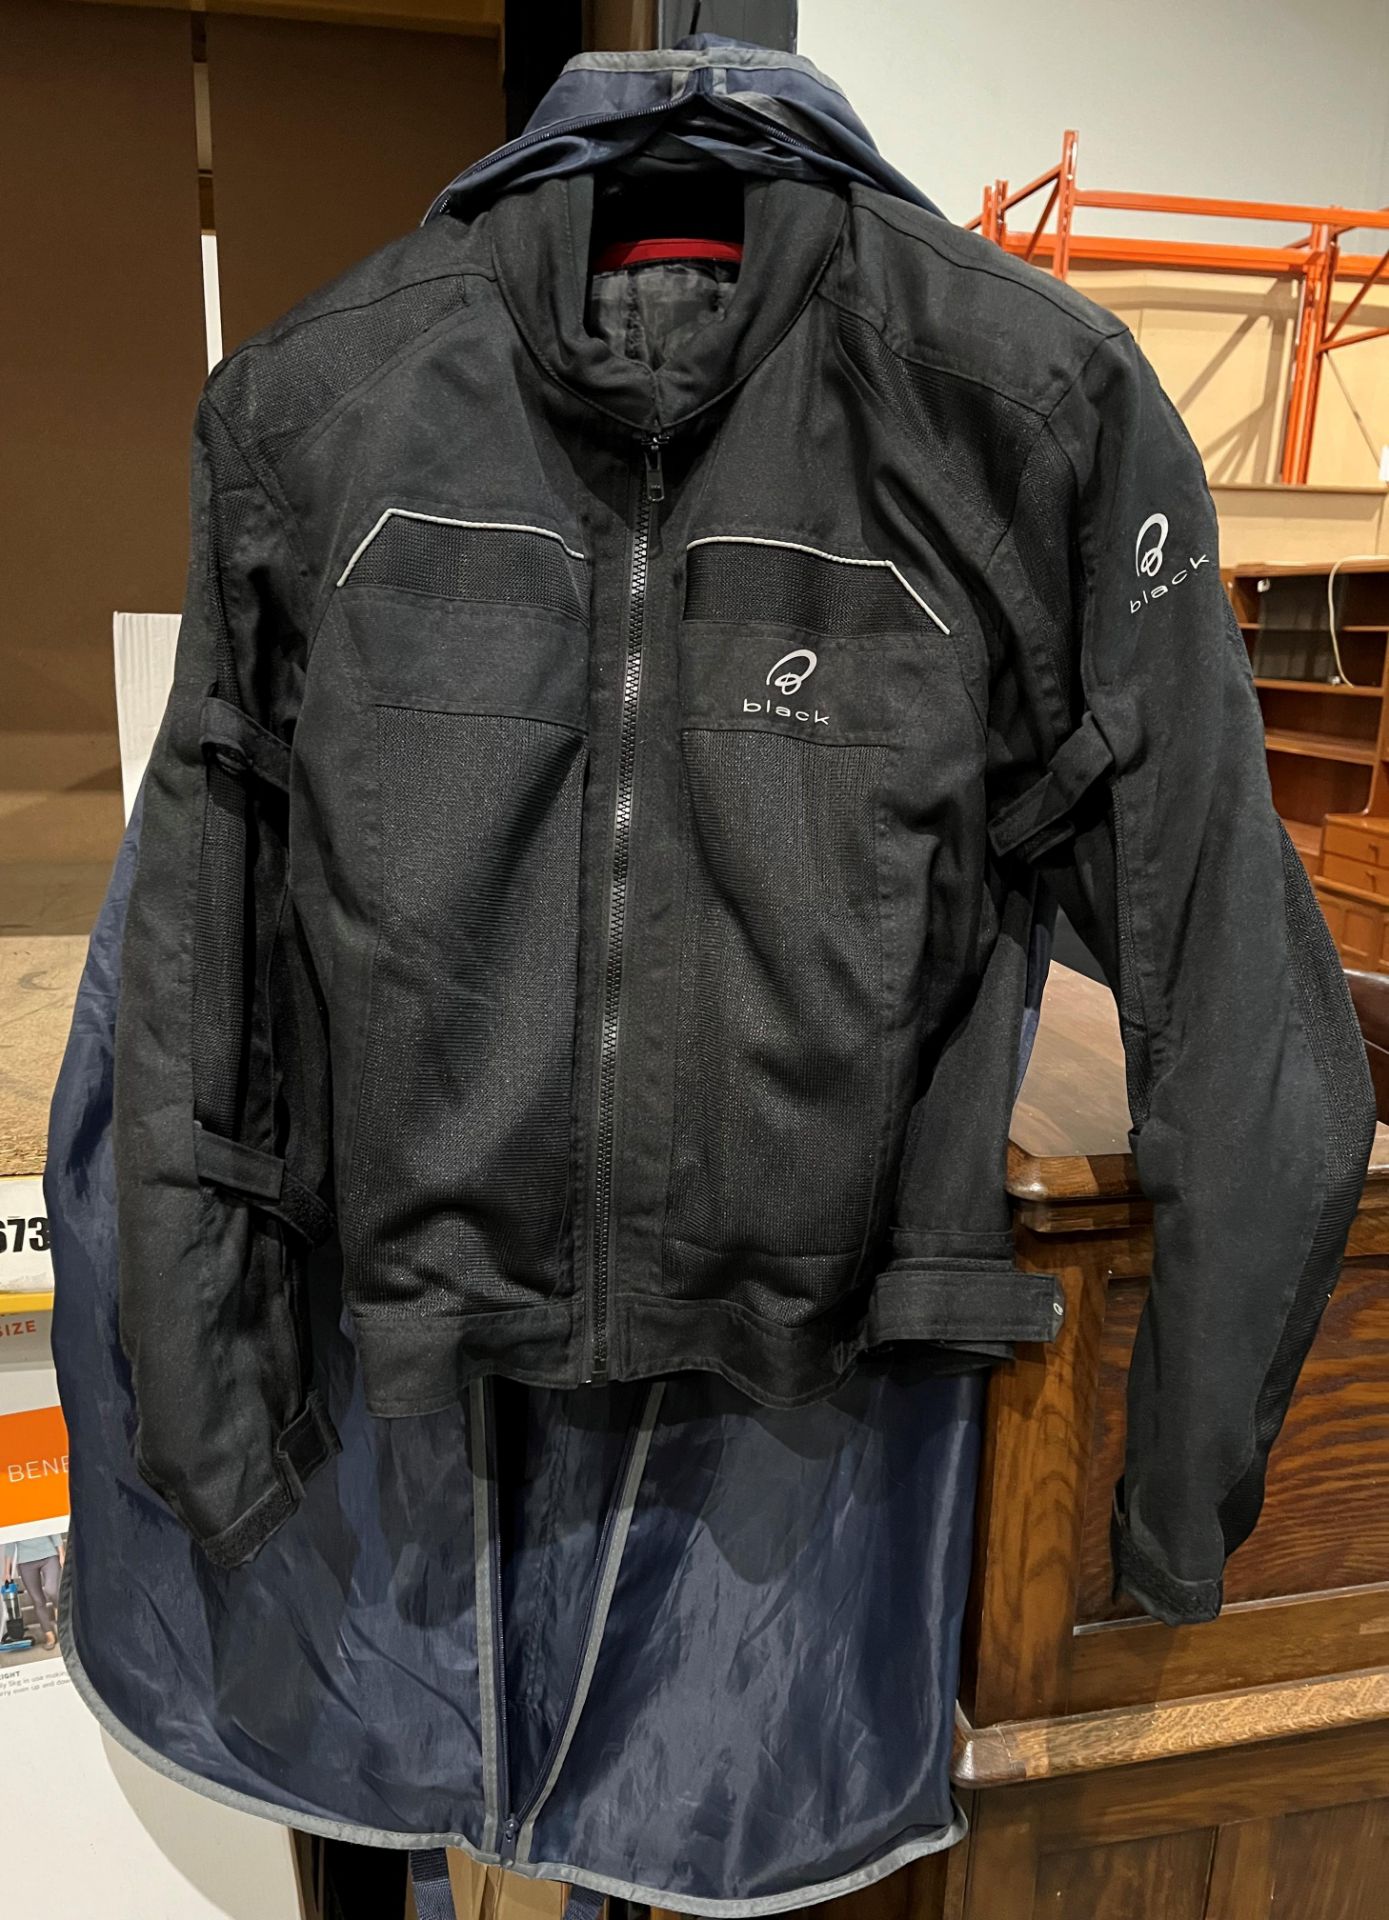 Used off road/quad clothing including a Spartan fabric jacket, size XL, and salopettes, size XL, - Bild 6 aus 7